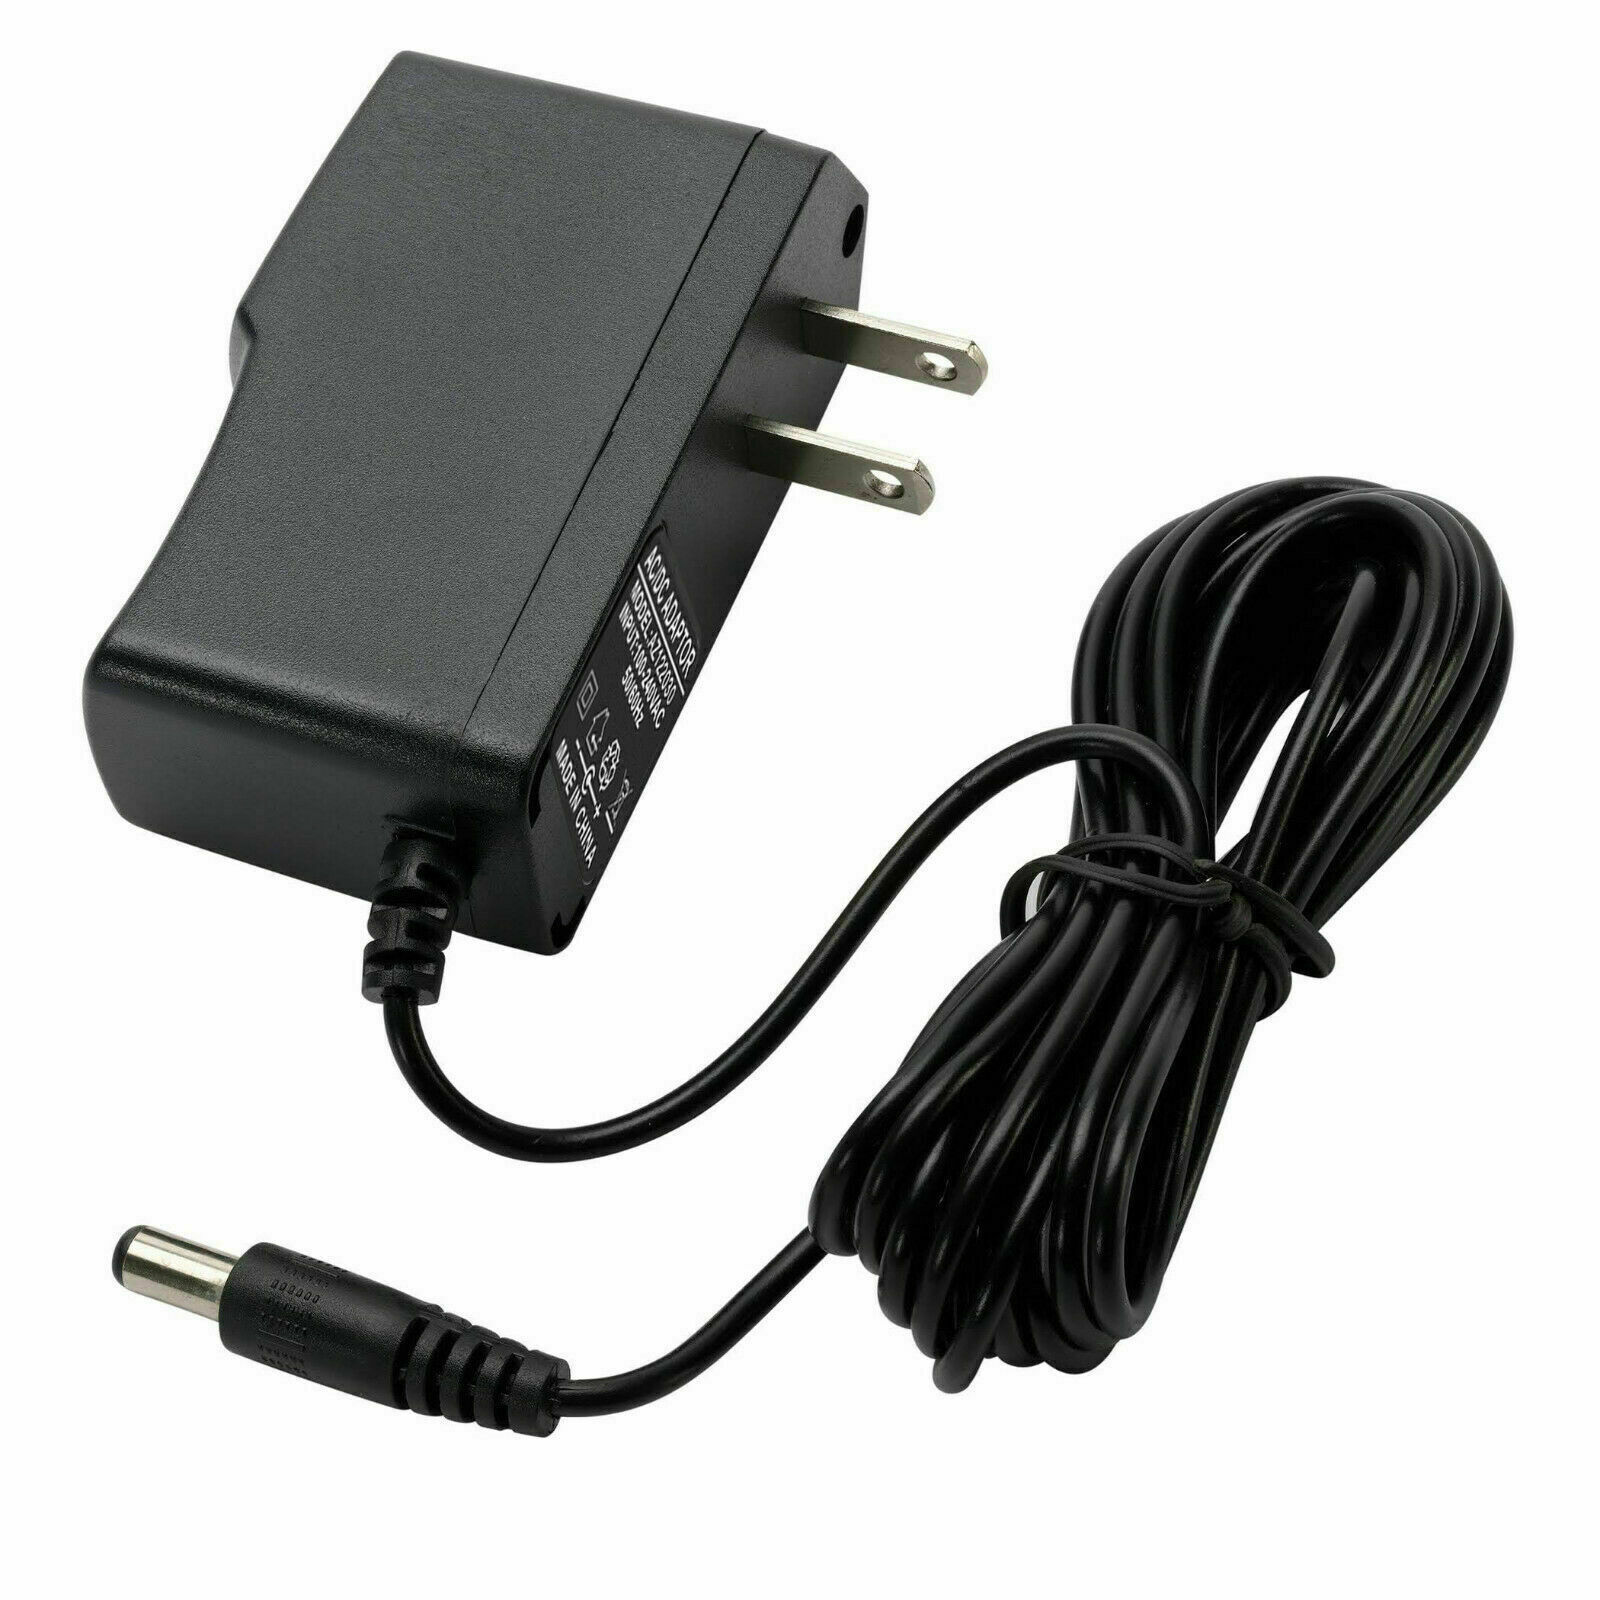 AC DC Adapter Charger For Acomdata/Dura Micro DM5133 DM 5133U Power Supply Cord